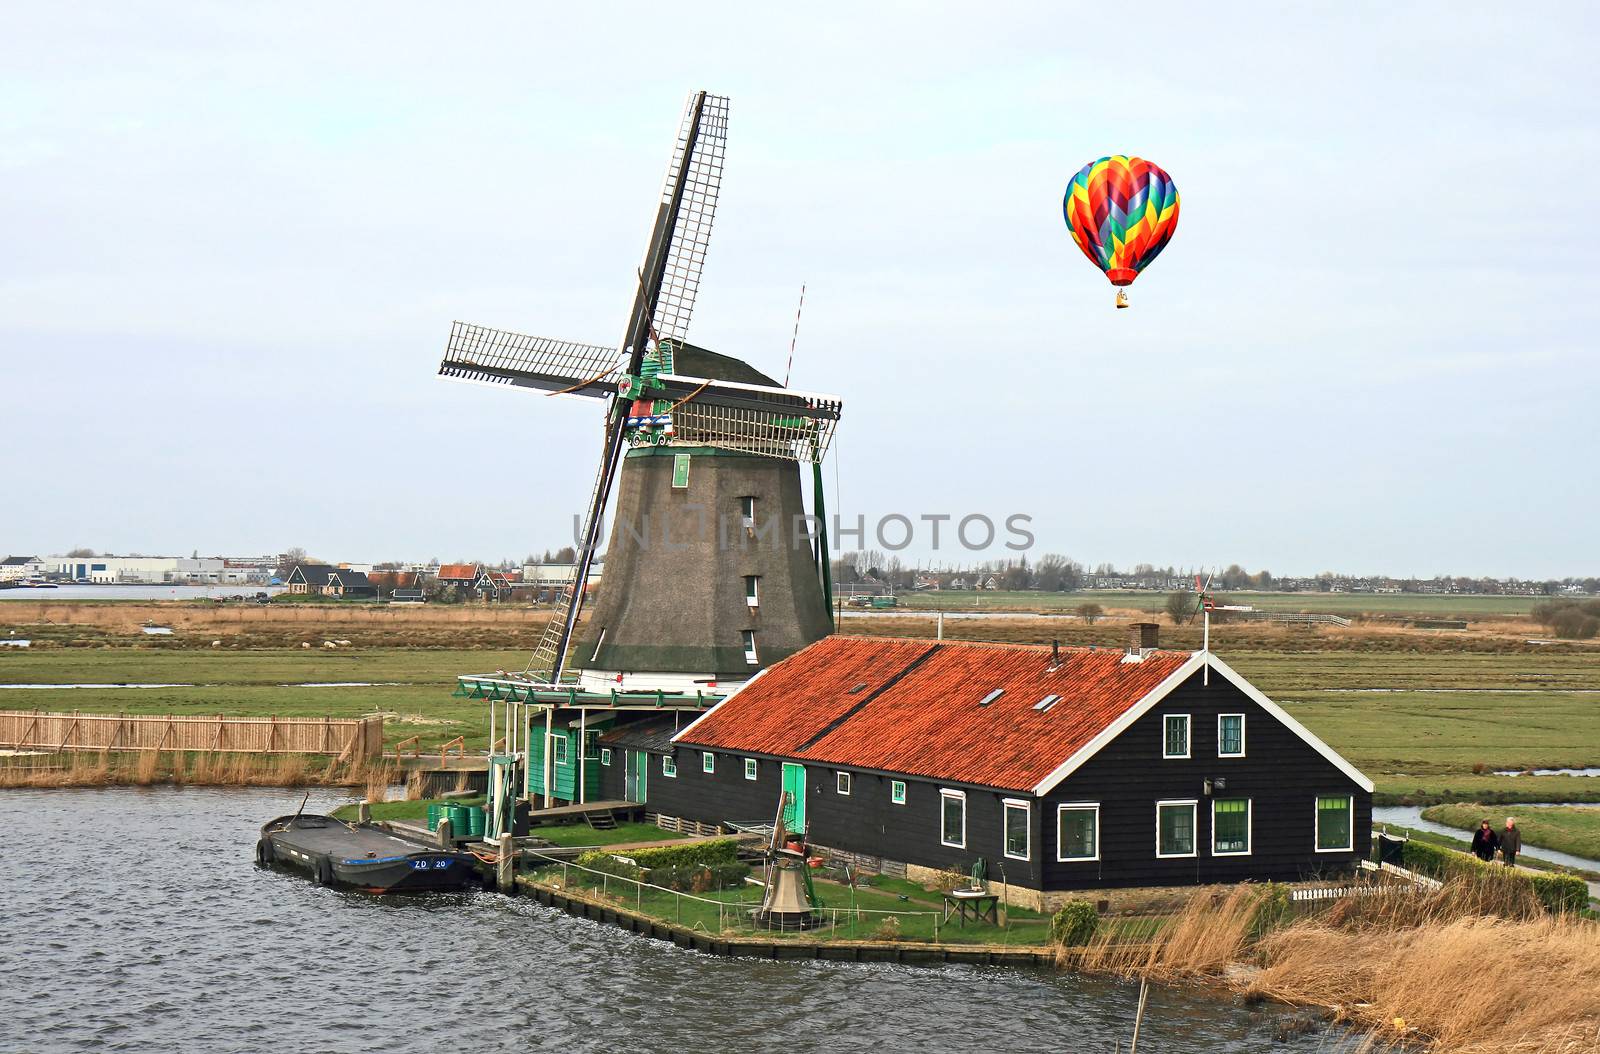 The windmill in Dutch countryside by gary718